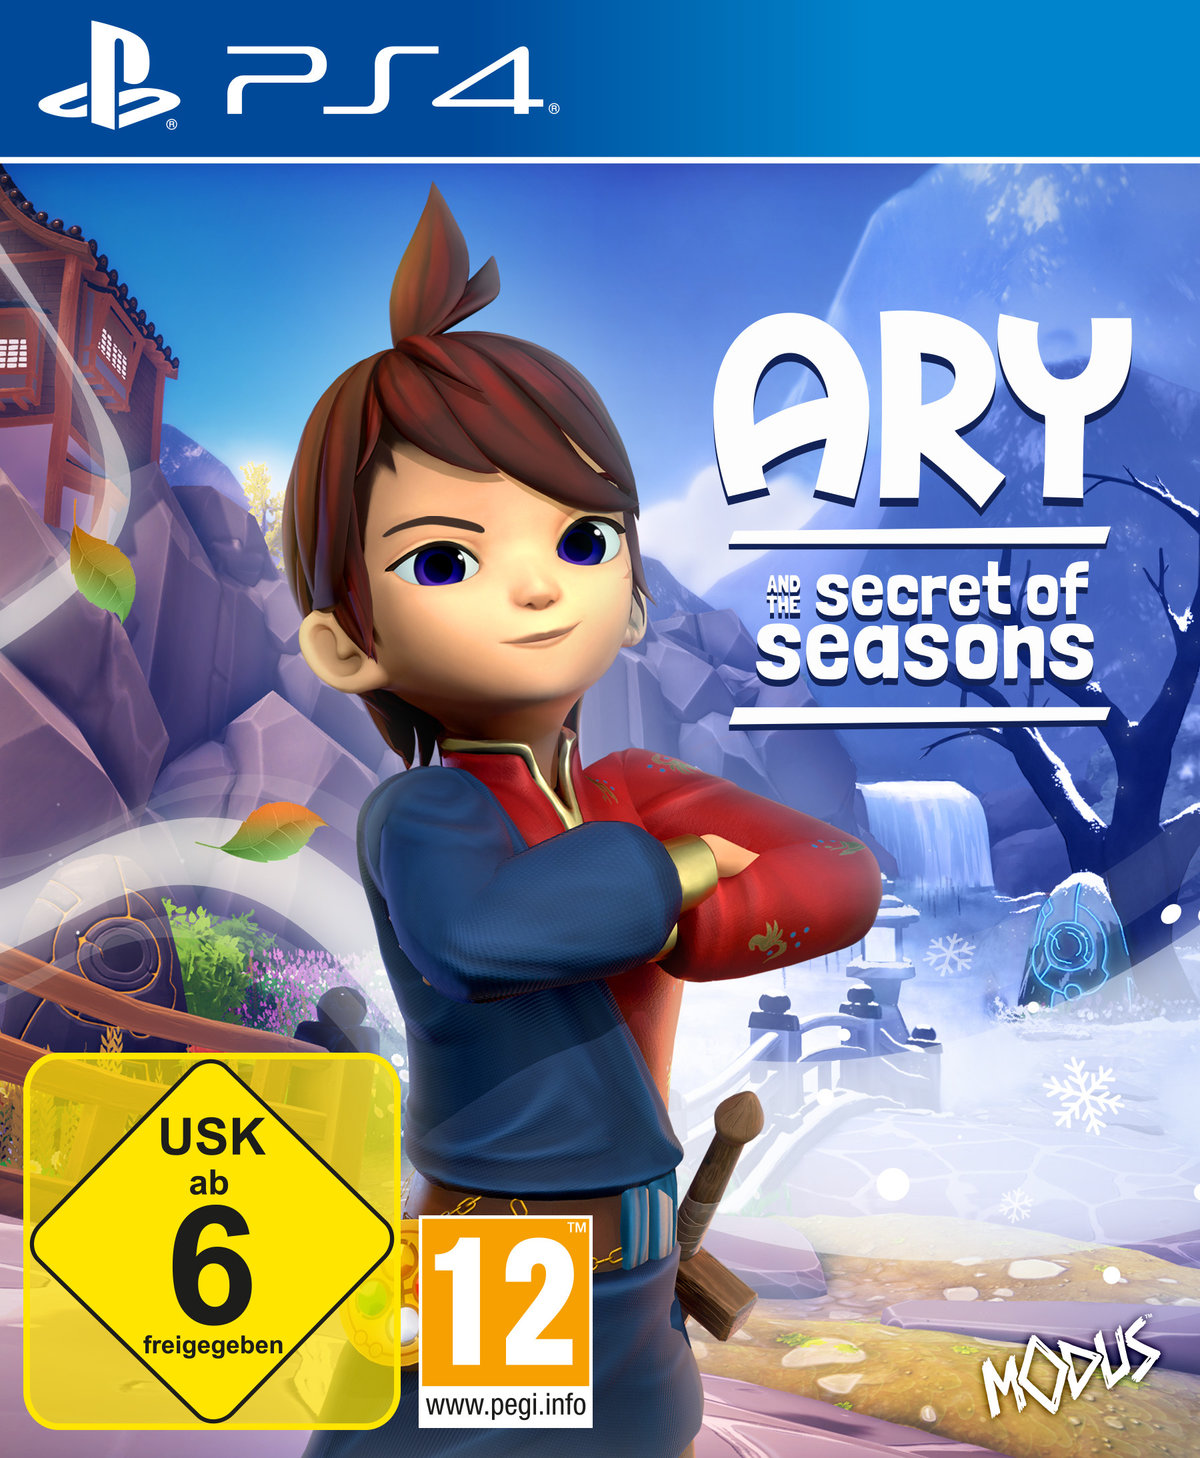 PS-4 Ary Seasons Secret - and 4] [PlayStation of the